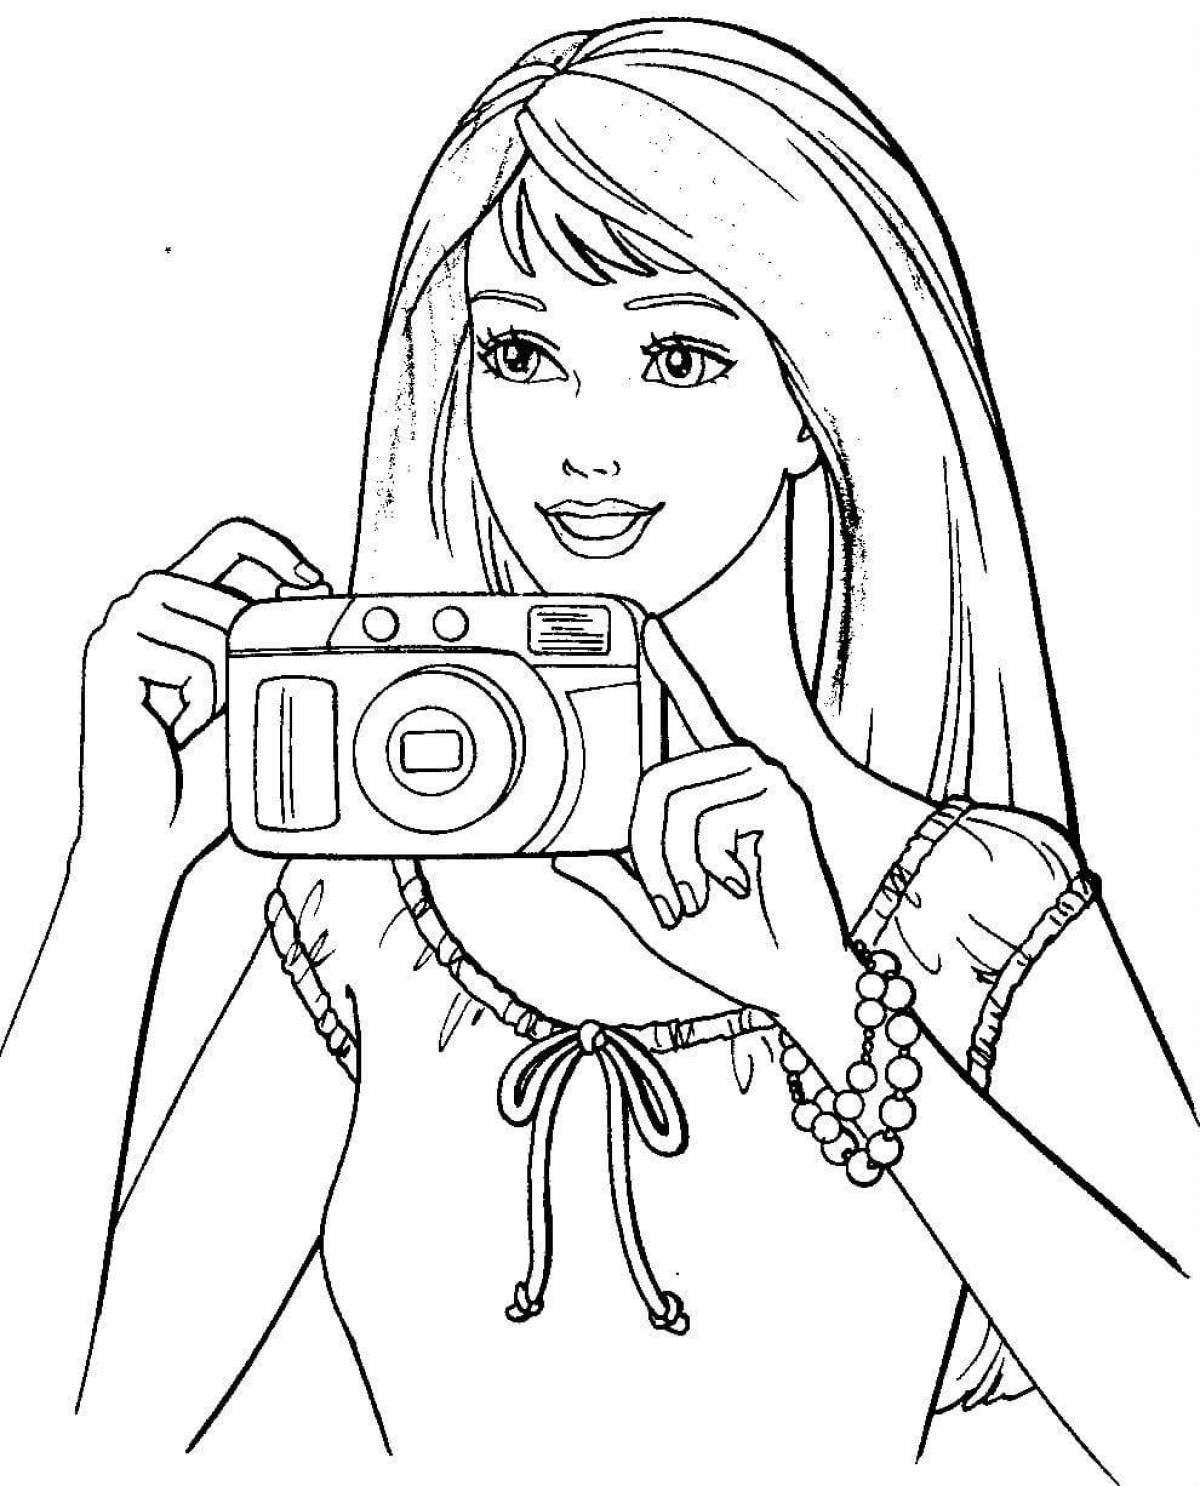 Fun coloring how to make a coloring book from a photo